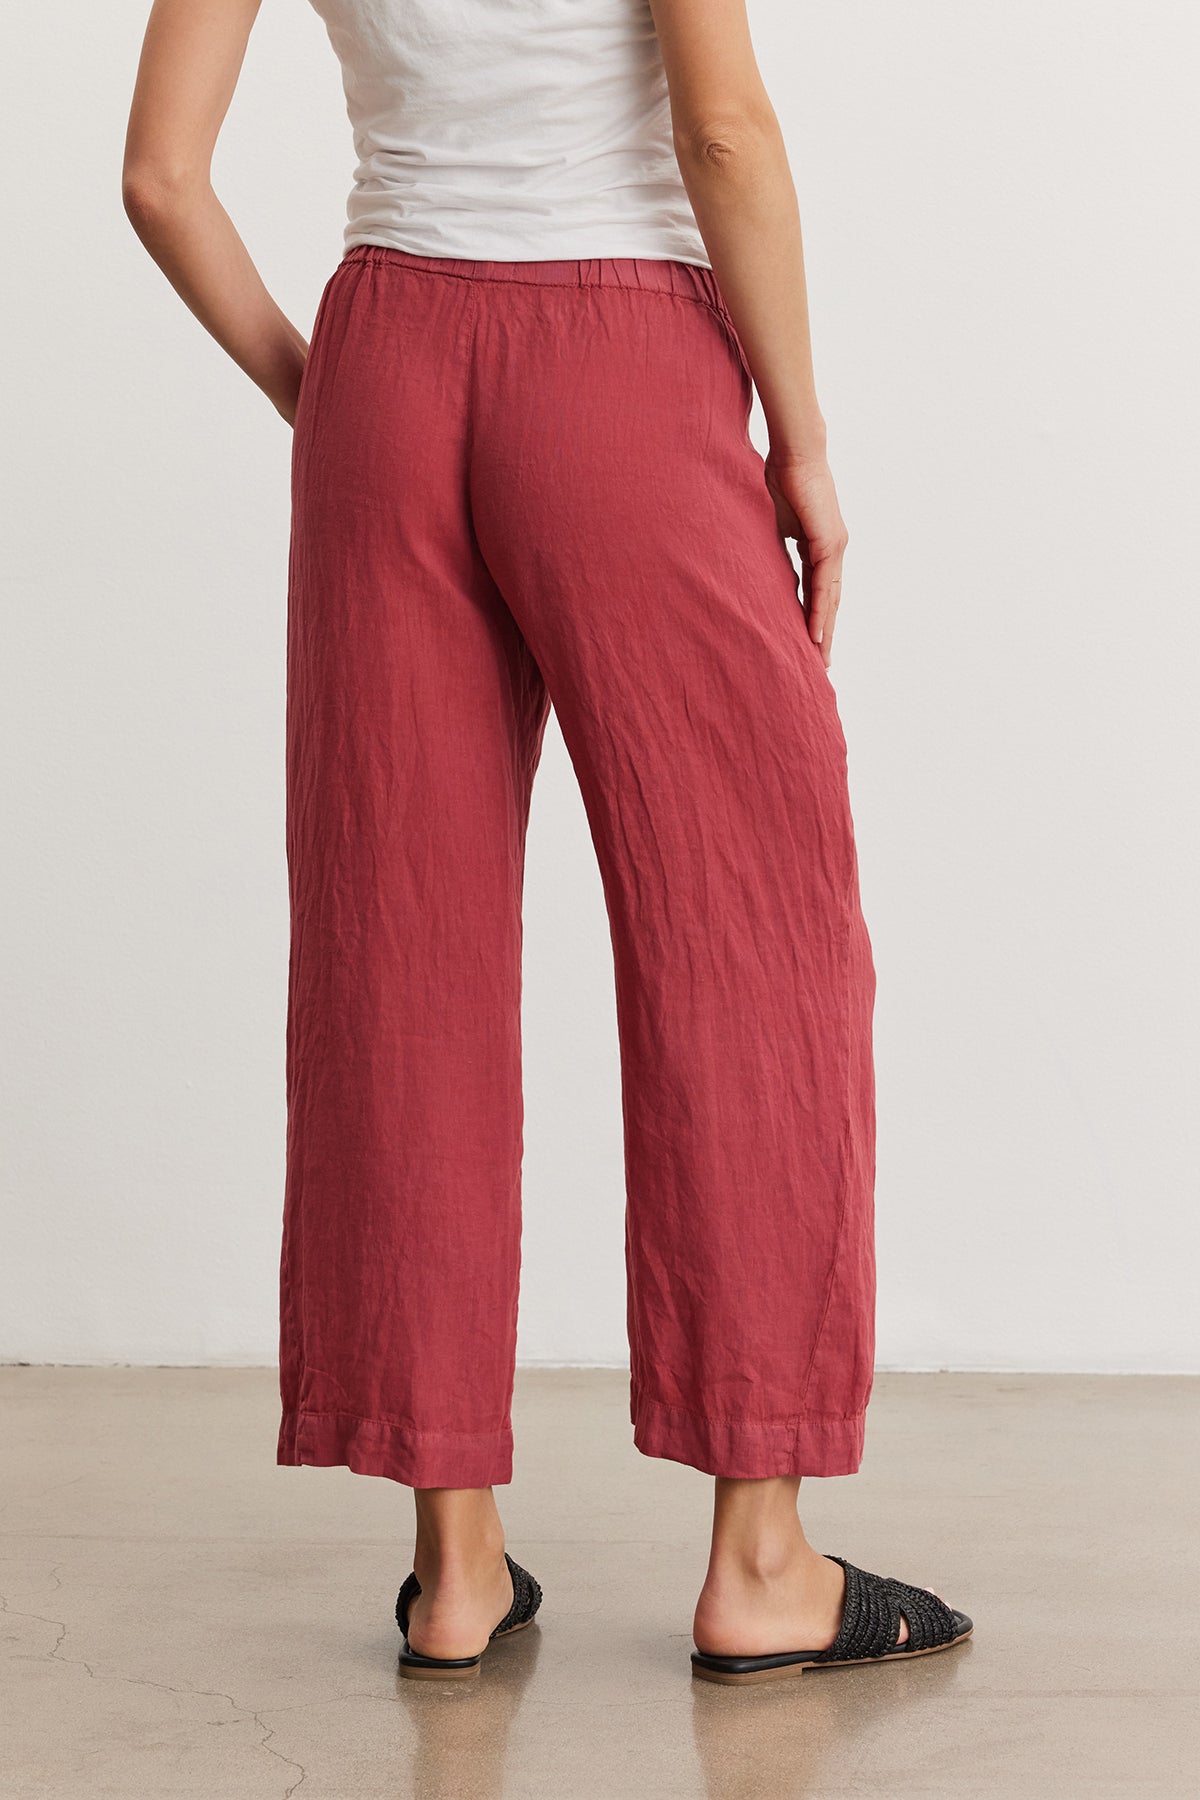 A person wearing the Velvet by Graham & Spencer LOLA LINEN PANT and black woven flats, standing with a side view against a neutral background.-36909573374145